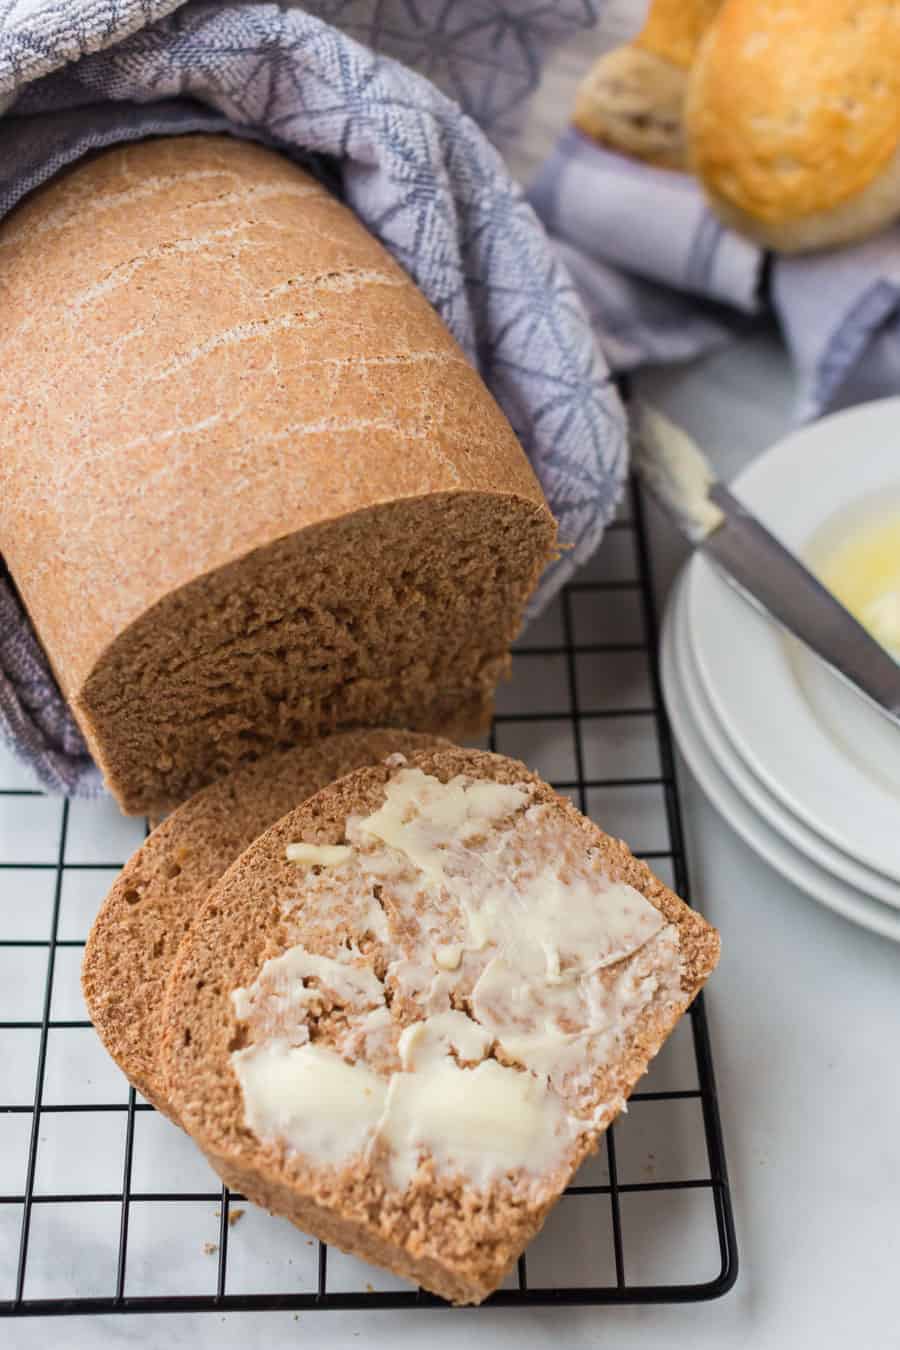 This simple whole wheat bread recipe made with wholesome ingredients will be your new go-to loaf for all your favorite sandwiches and toasts!